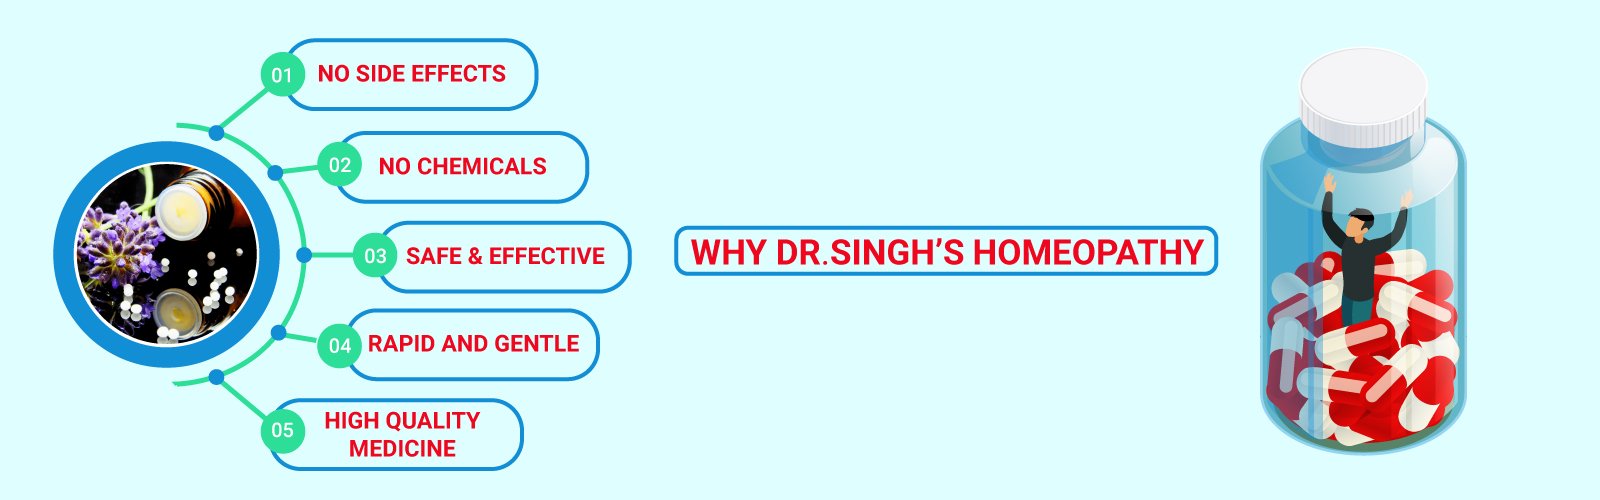 Why DR. Singh's Homeopathy